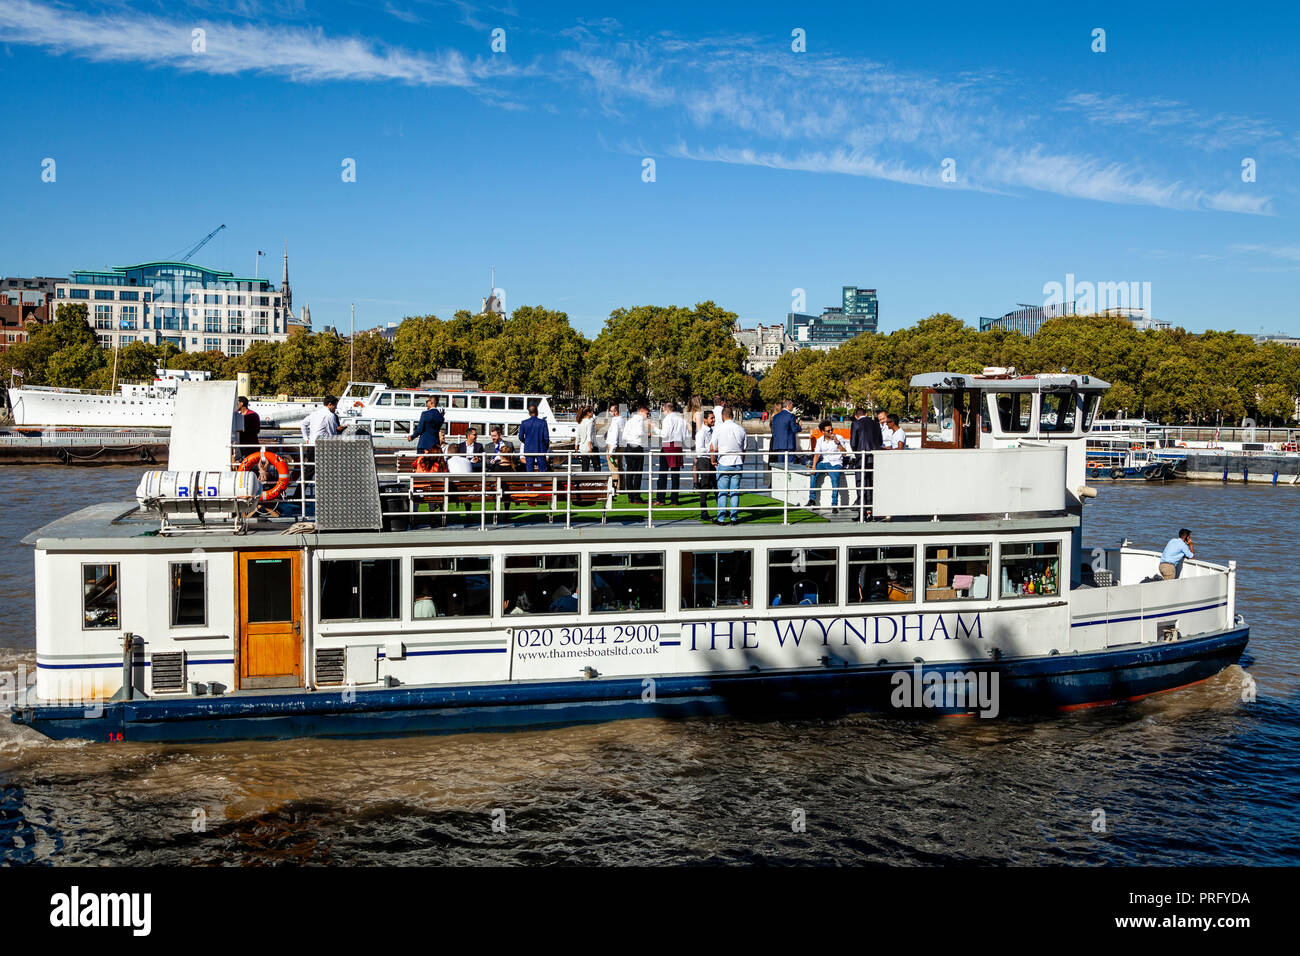 The Wyndham Party Boat On The River Thames, London, UK Stock Photo